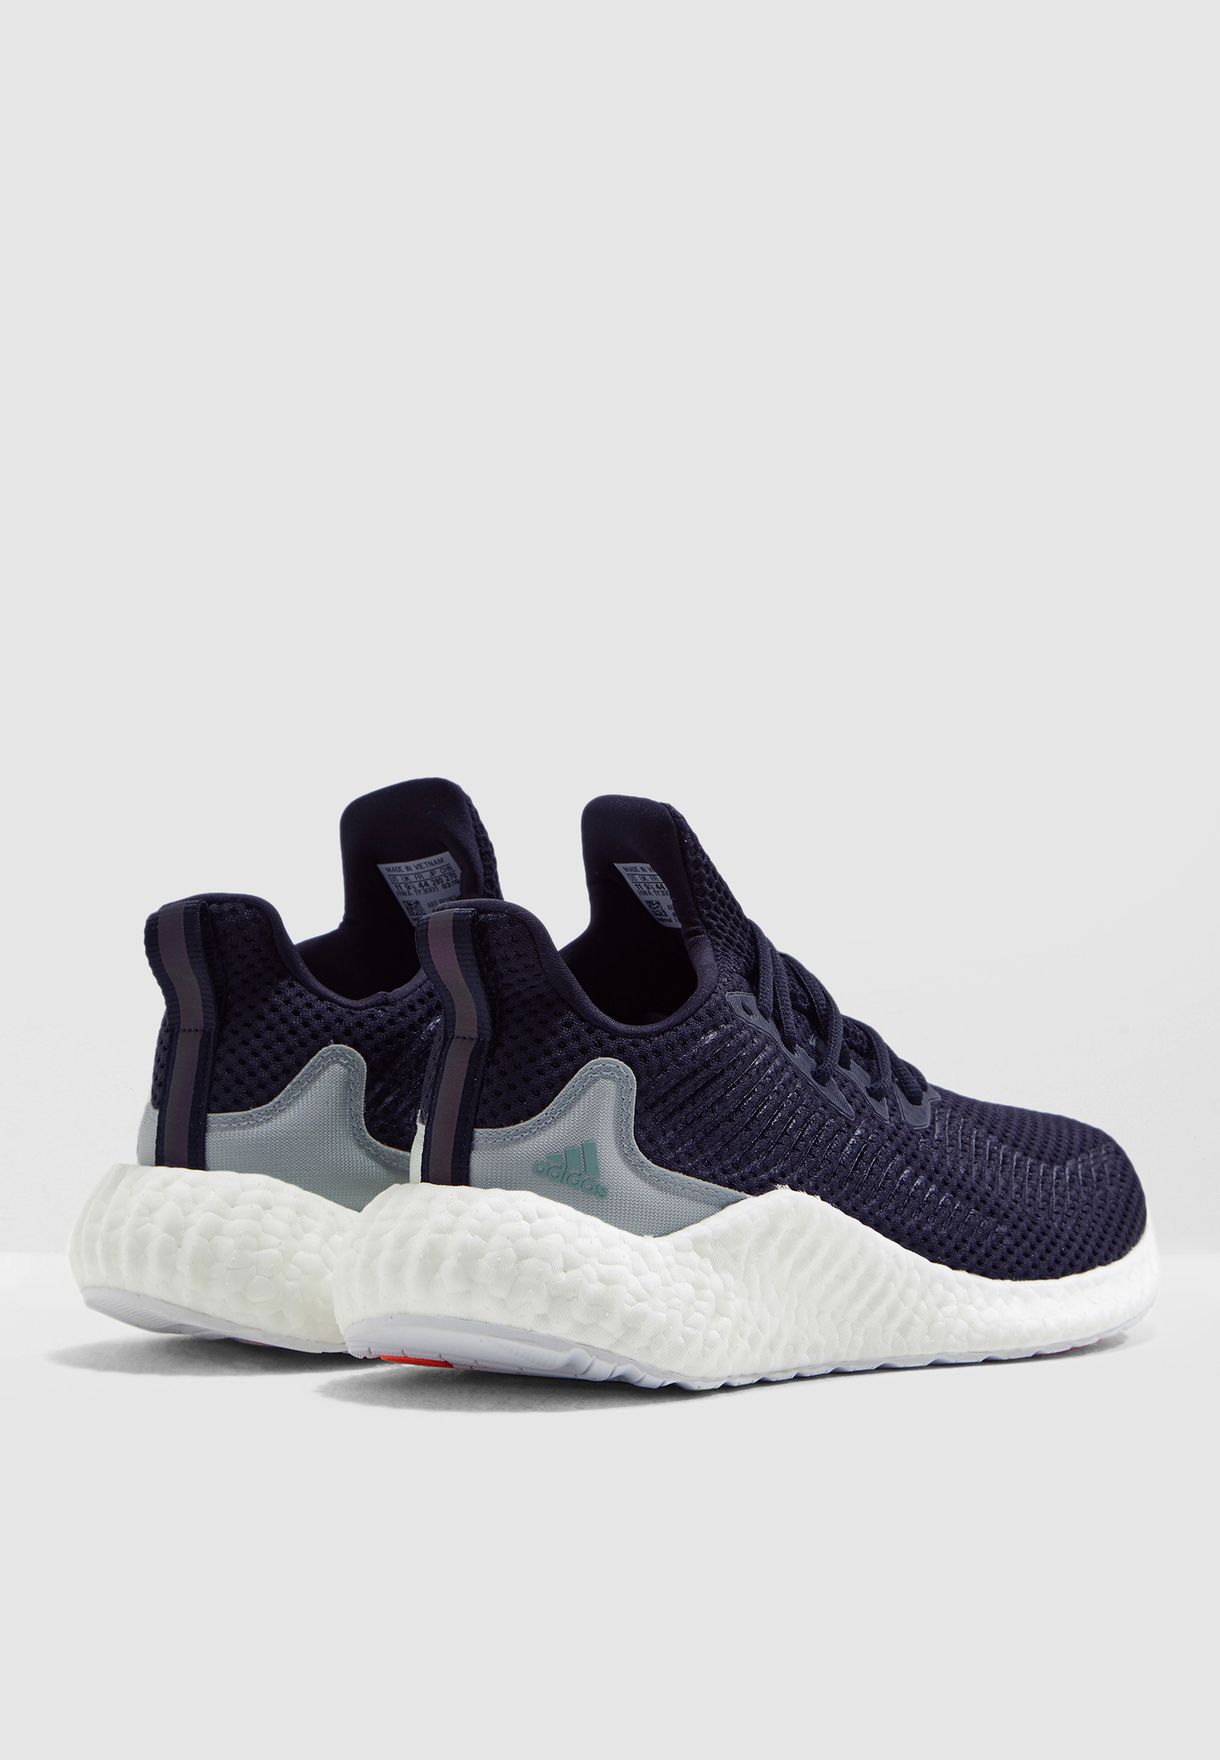 parley alphaboost